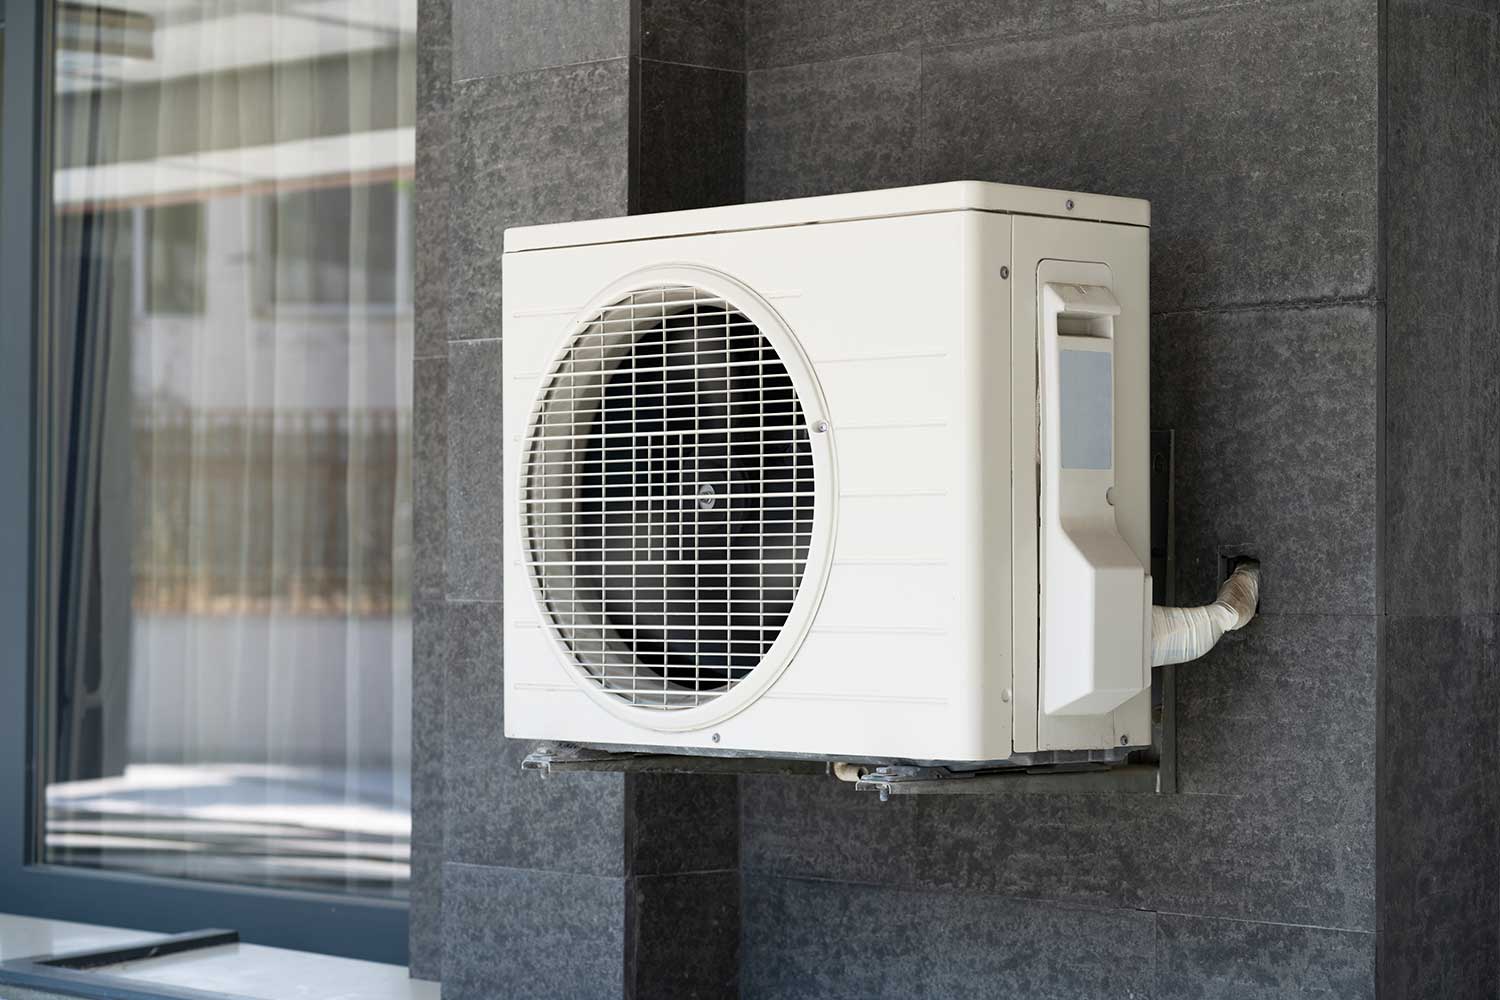 Heating and Cooling the Home With a Good HVAC System is Critical